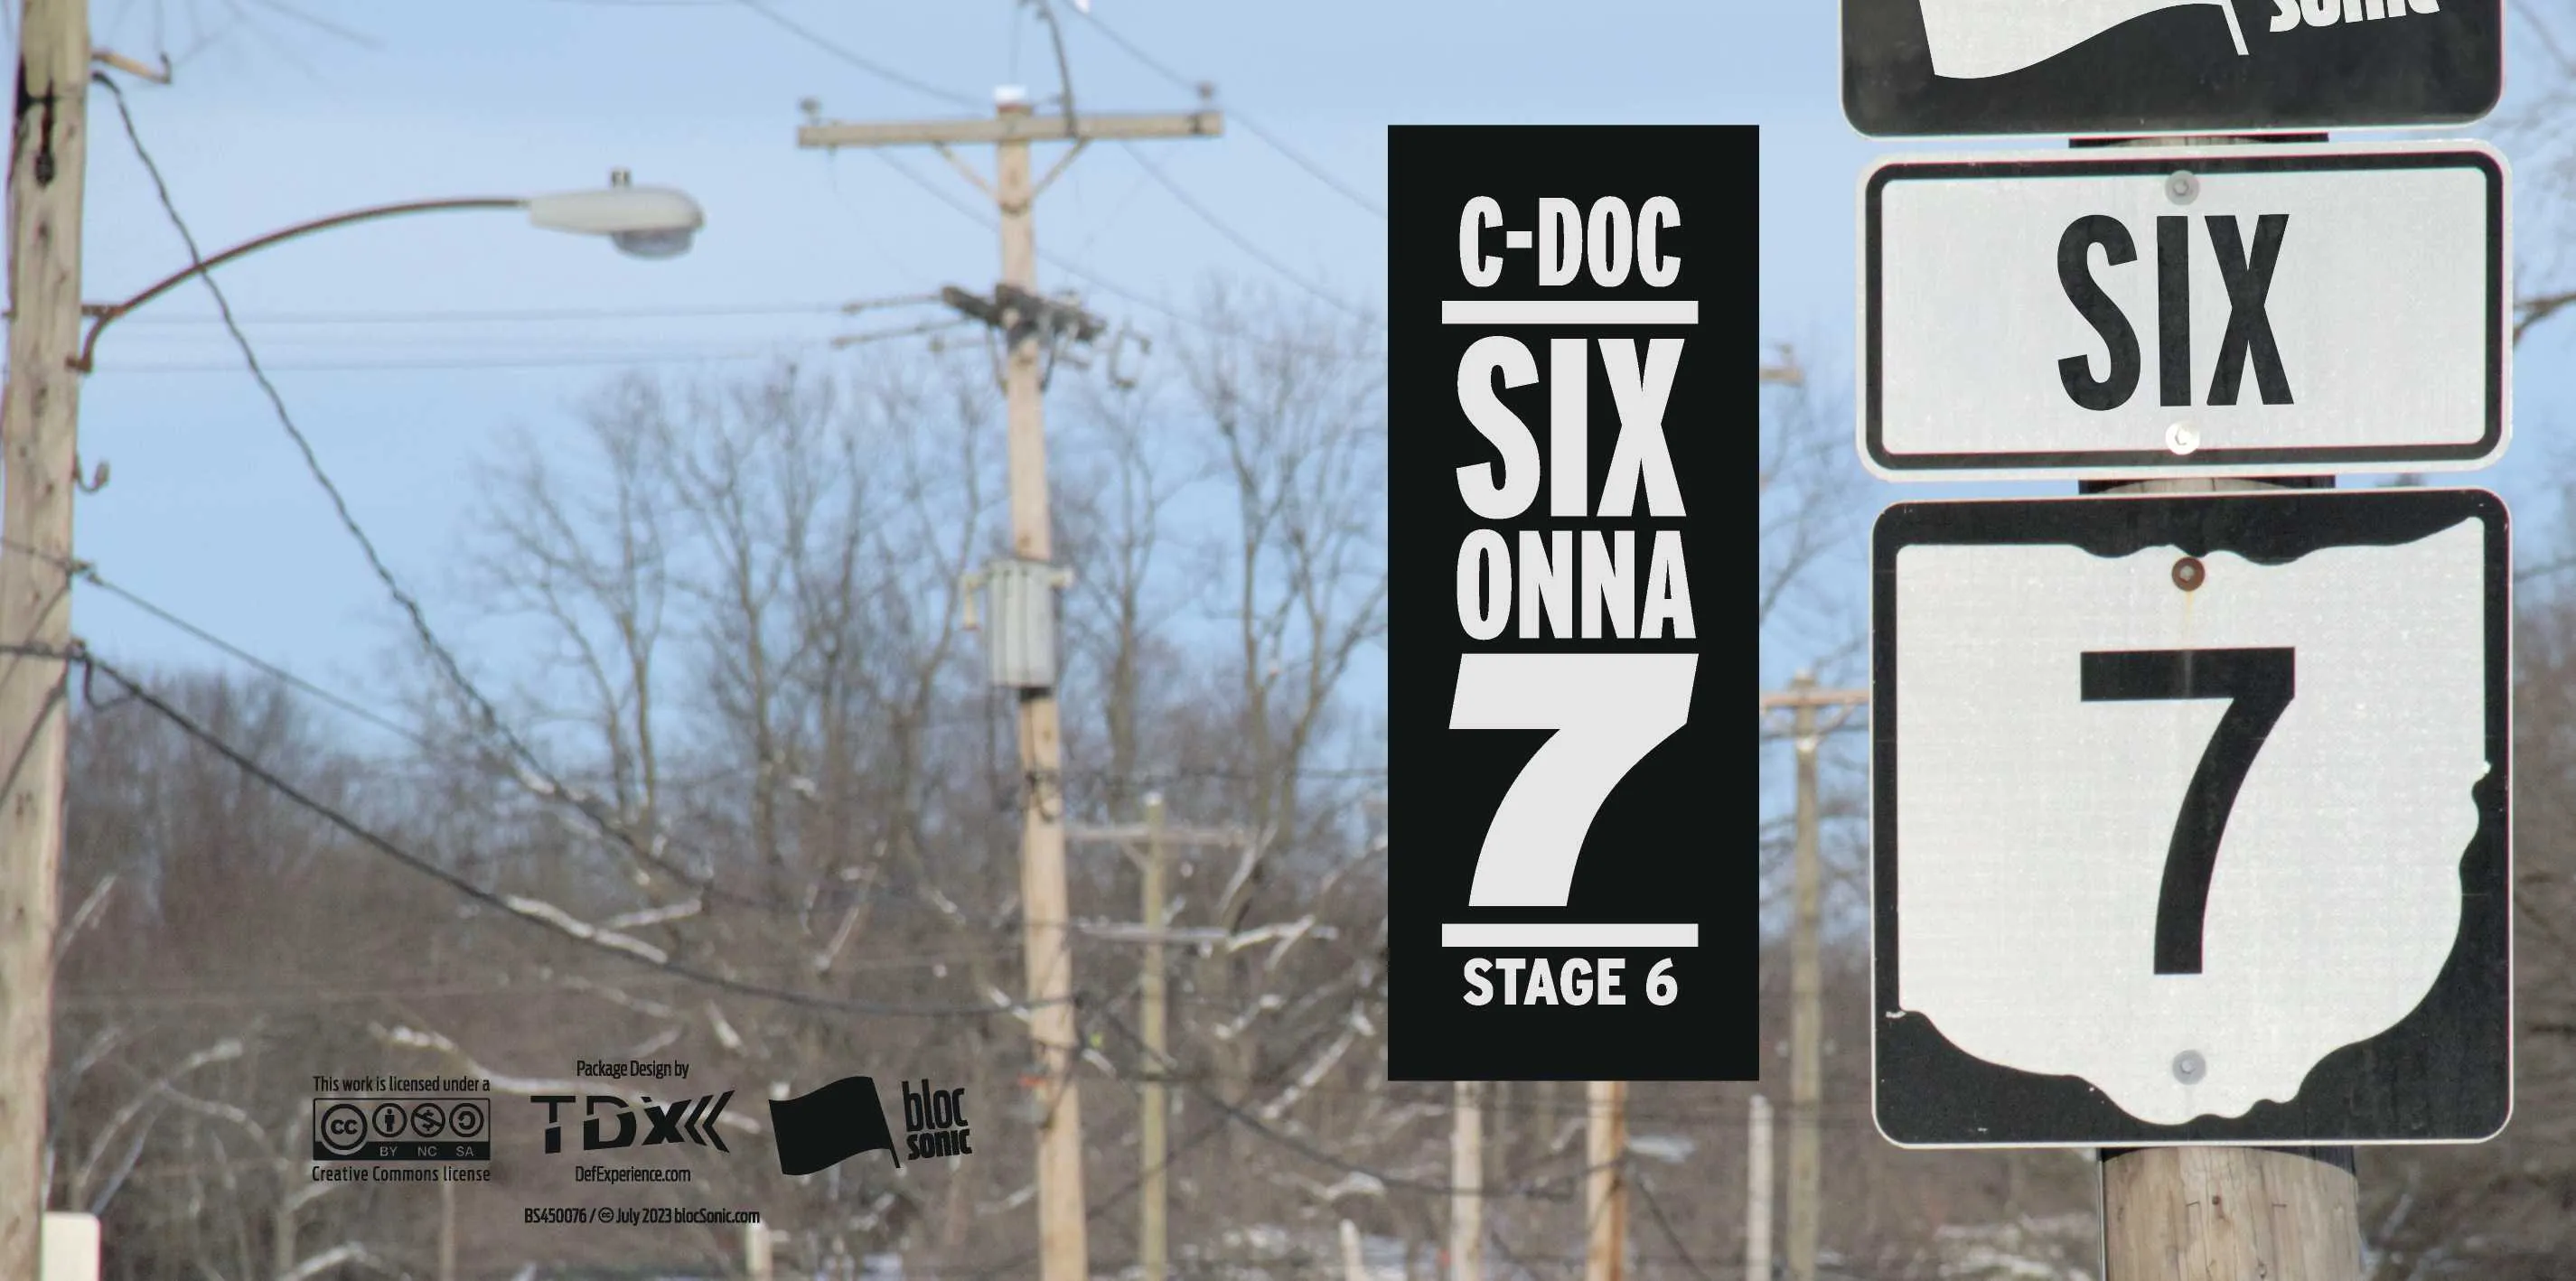 Album insert for “SIX ONNA 7 (Stage 6)” by C-Doc